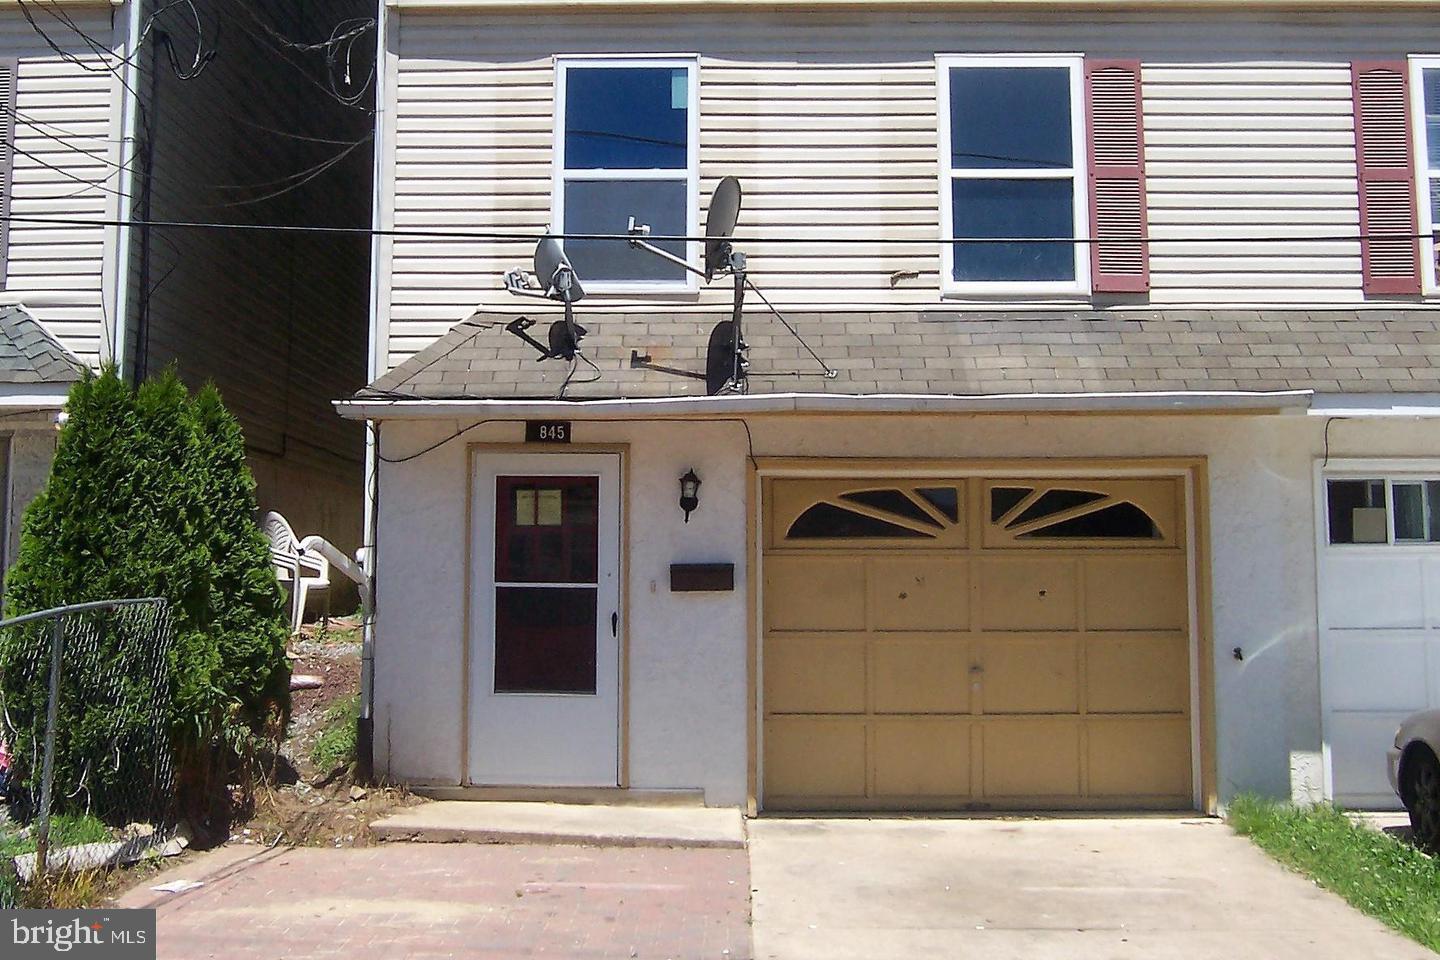 a view of a house with a door and garage